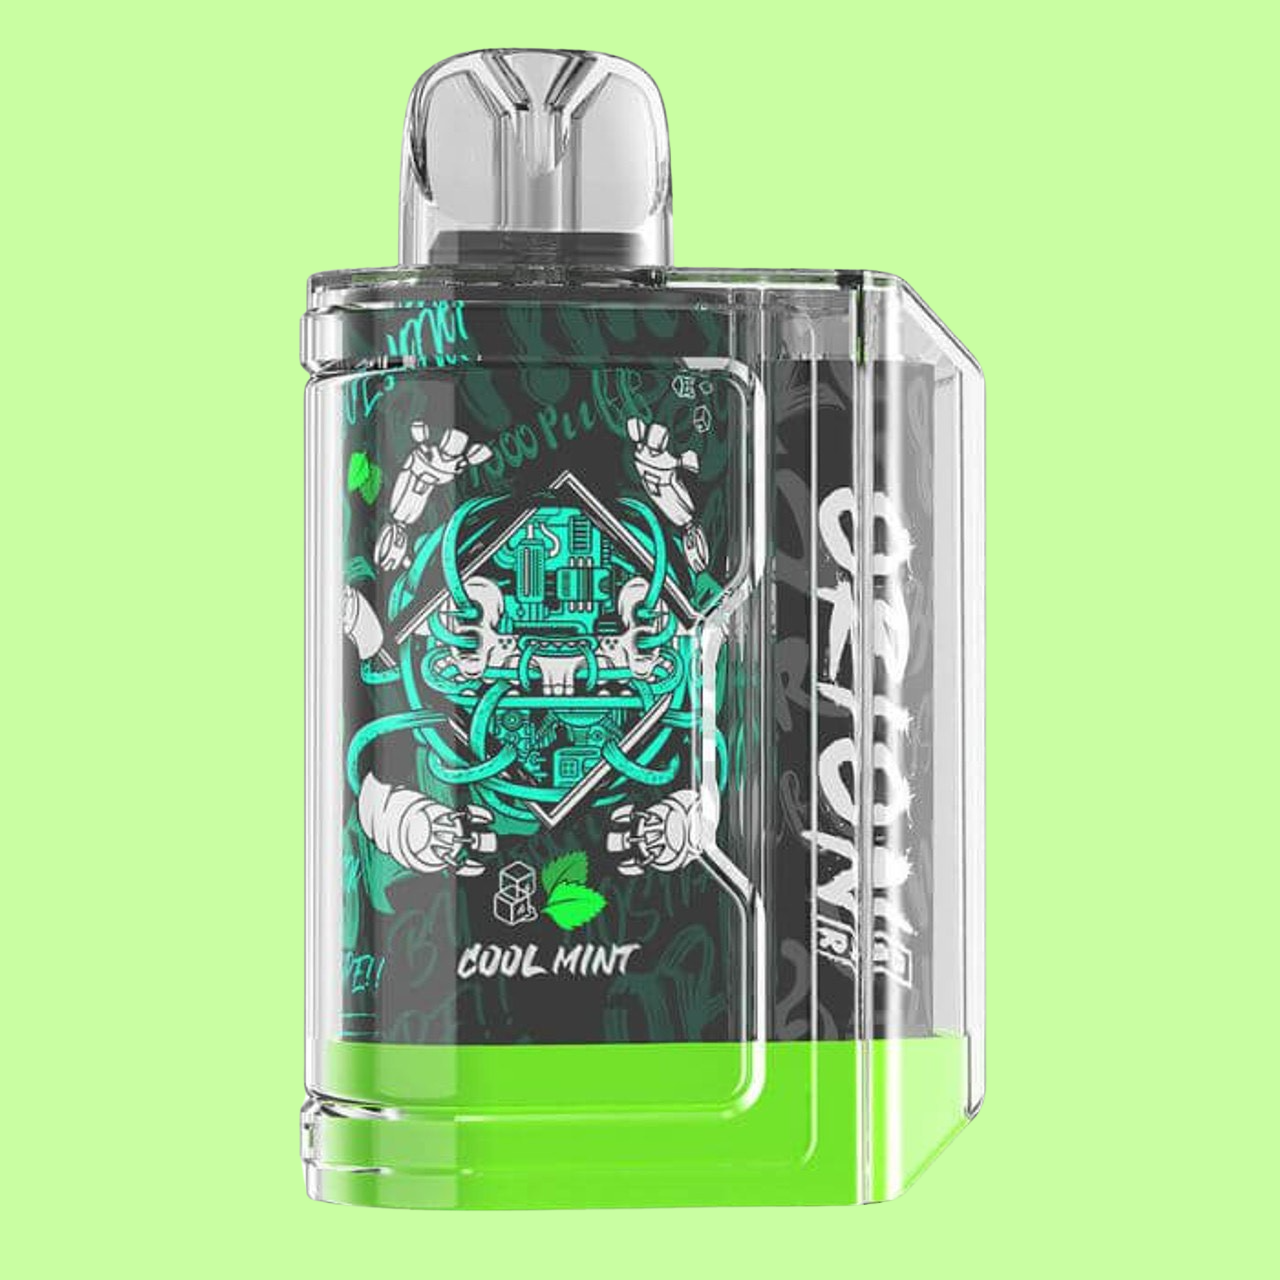 ORION cool mint